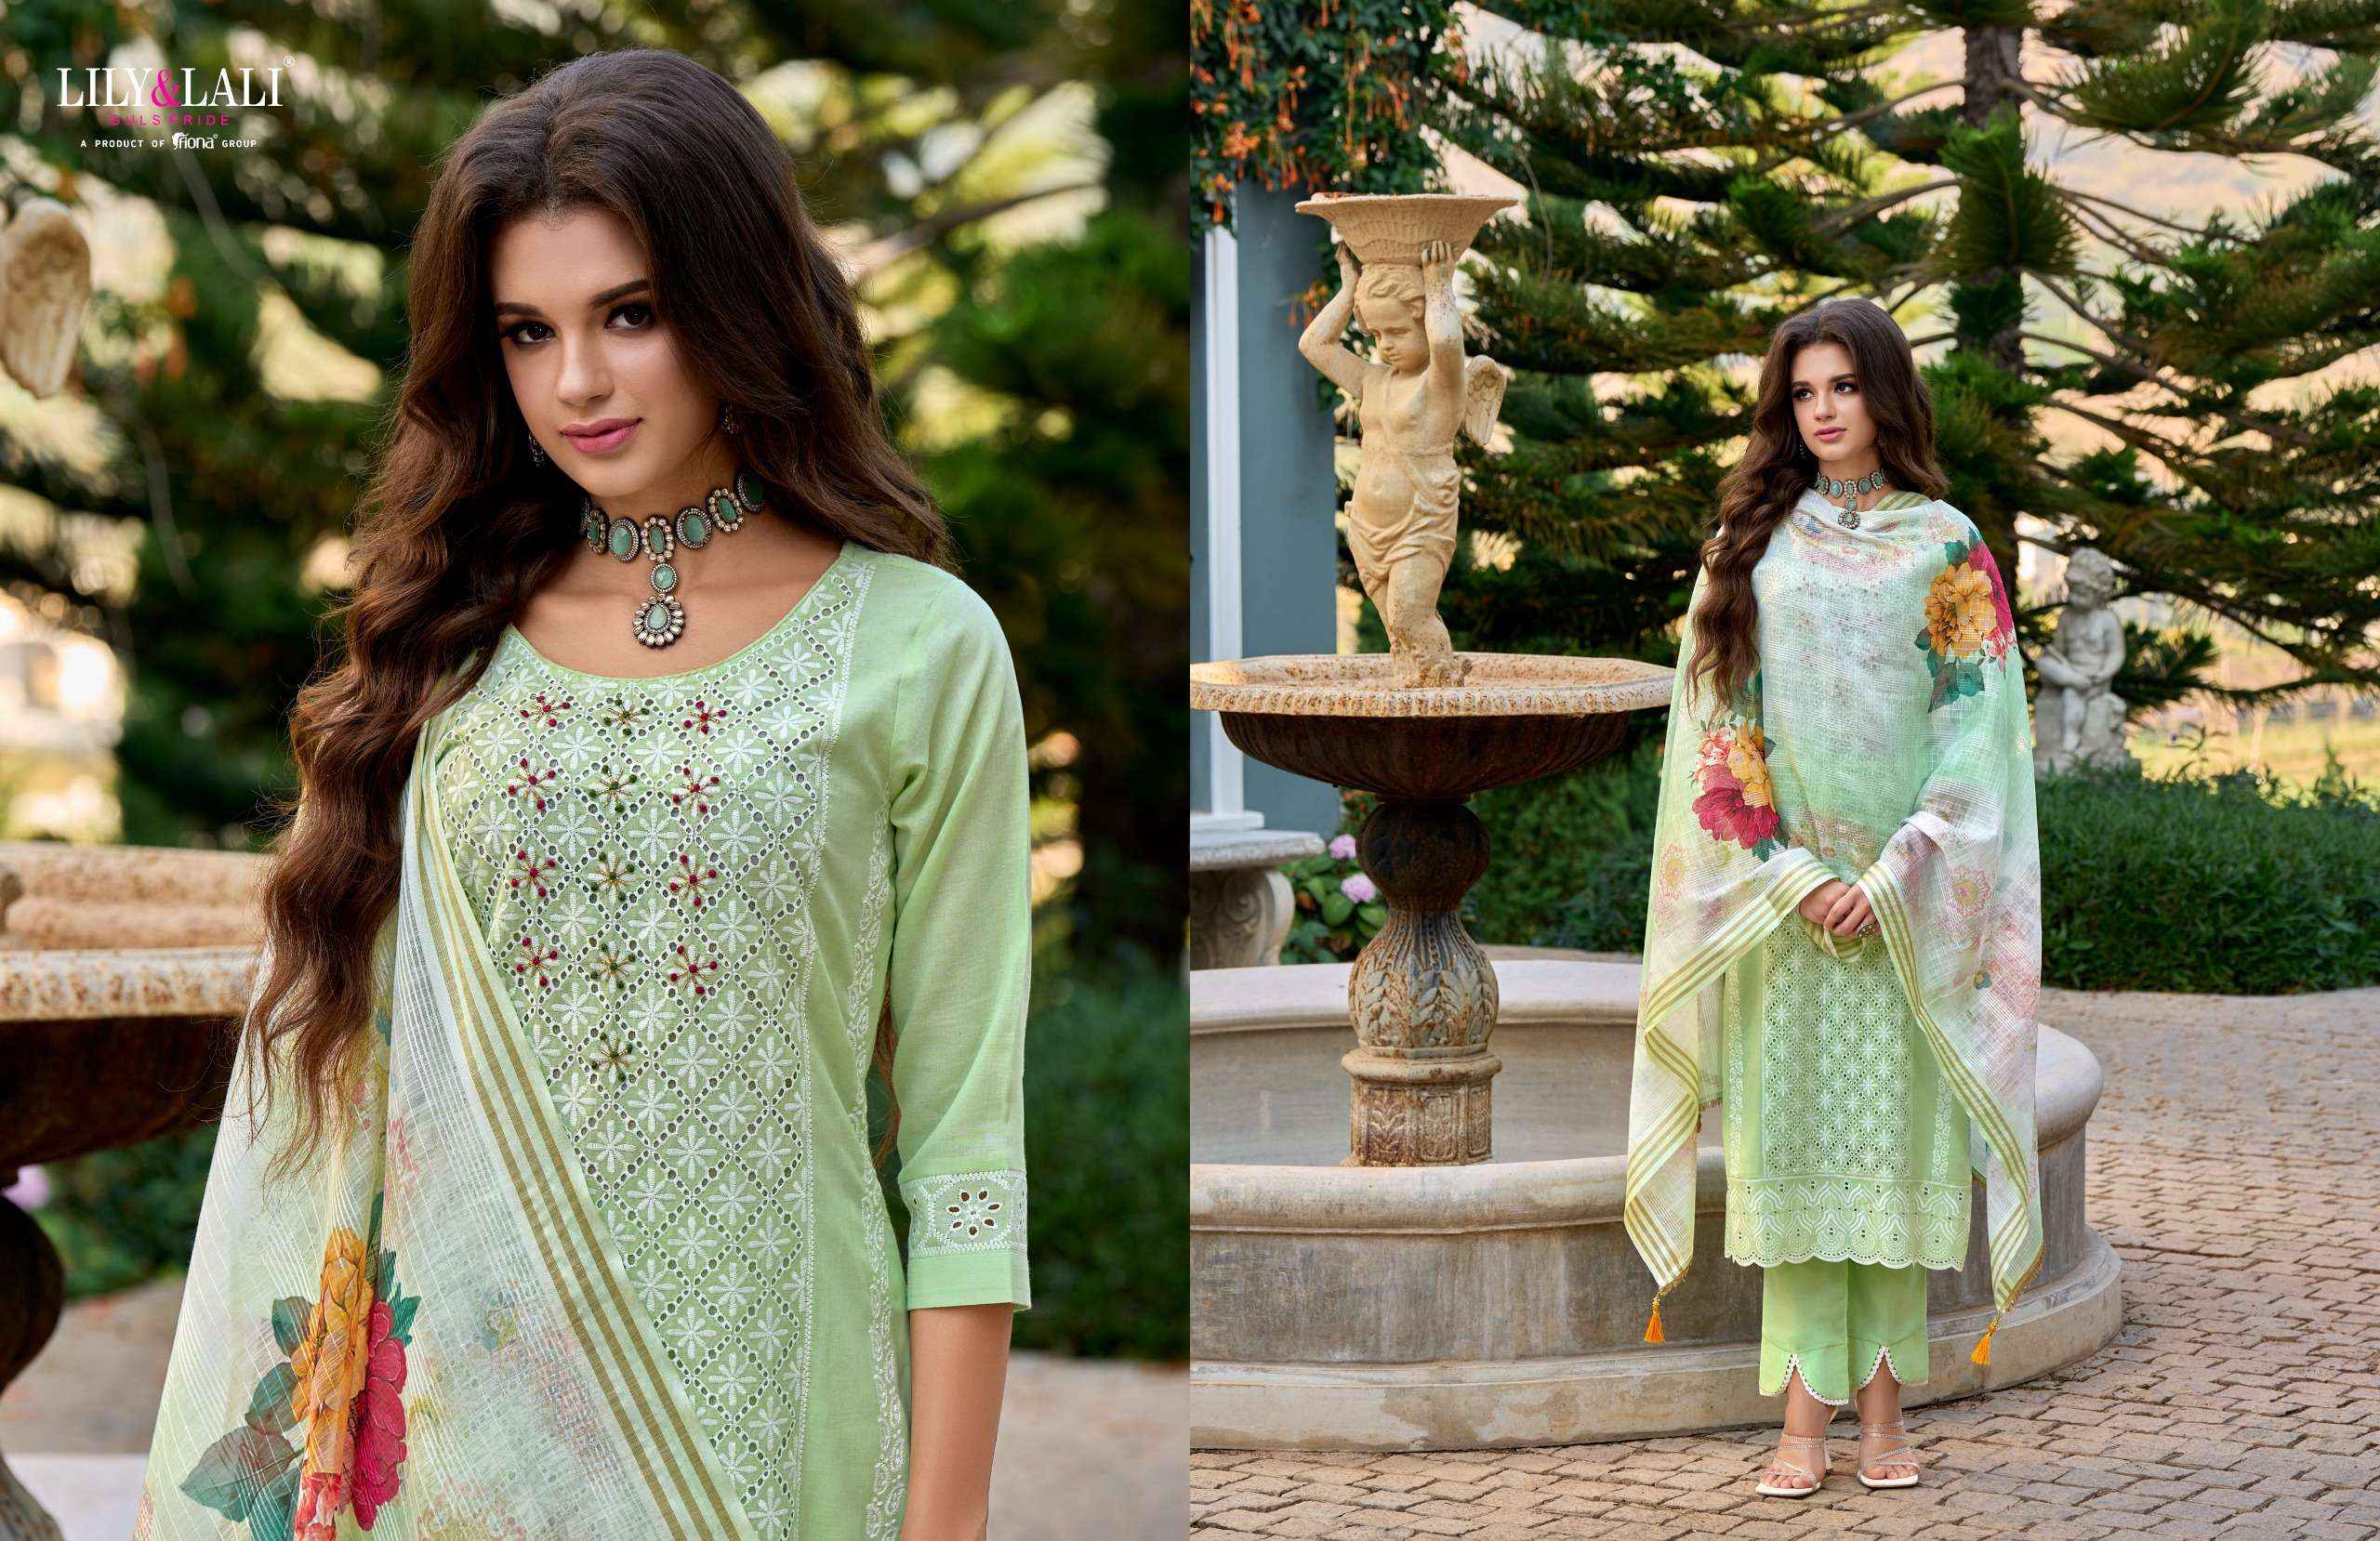 LILY AND LALI COTTON CARNIVAL SCHIFFLI DESIGNER READYMADE SUITS ( 6 PCS CATALOG )